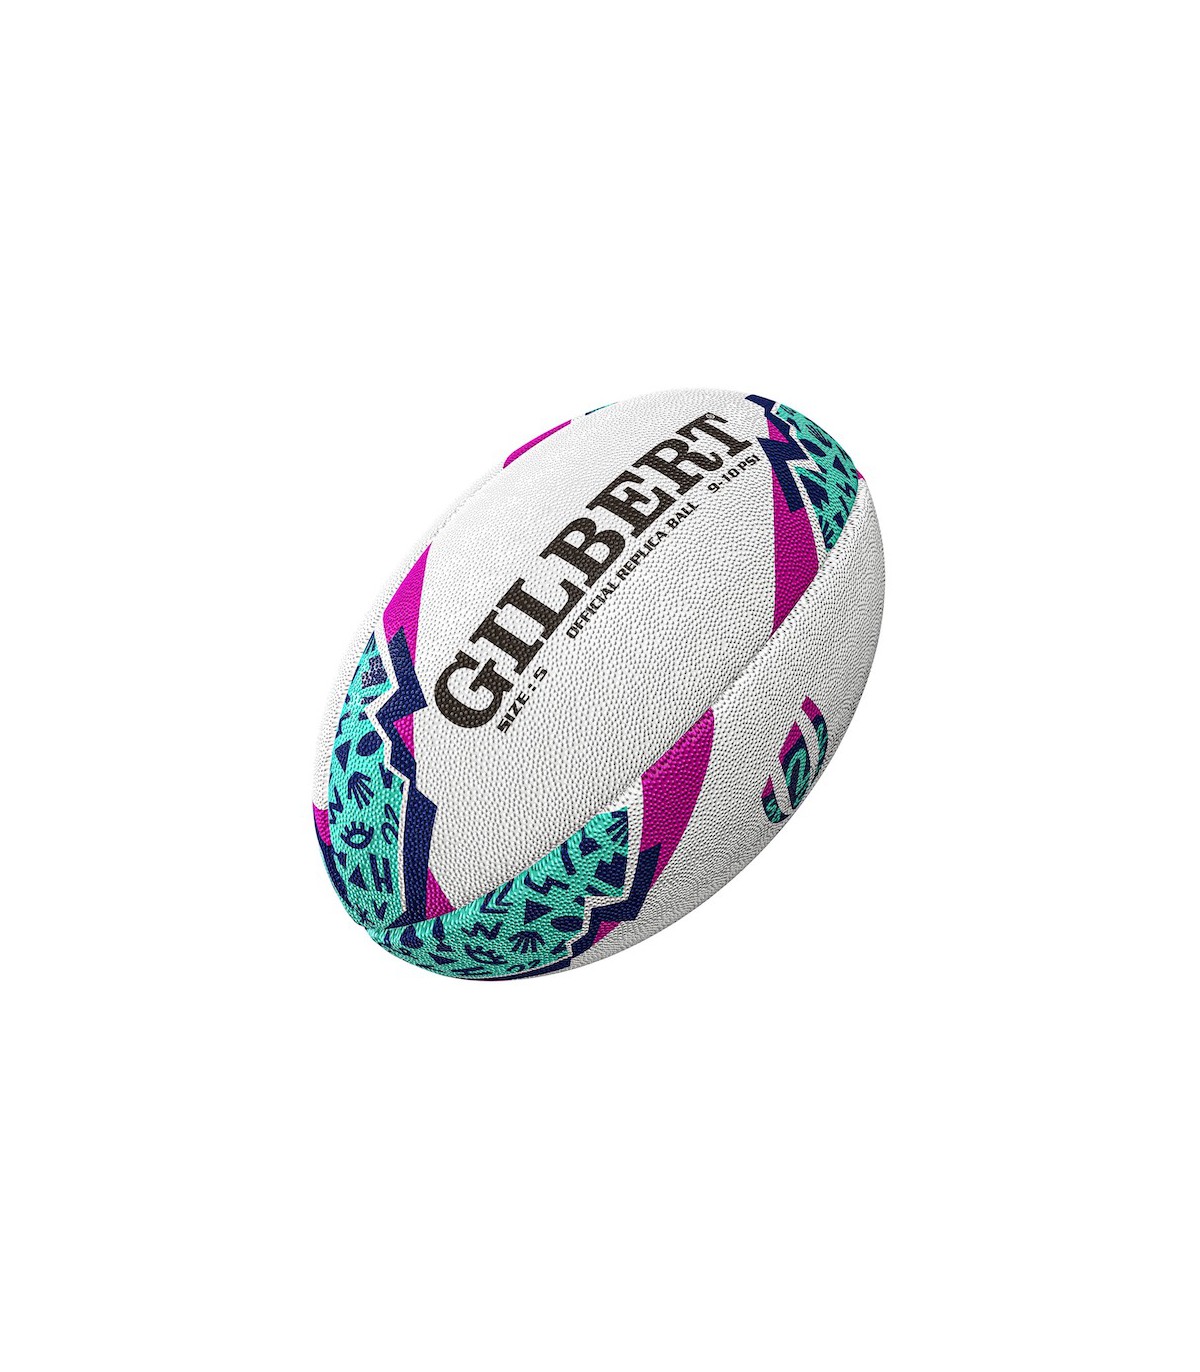 Gilbert Rugby World Cup 2022 7s Supporter Ball Bash Online